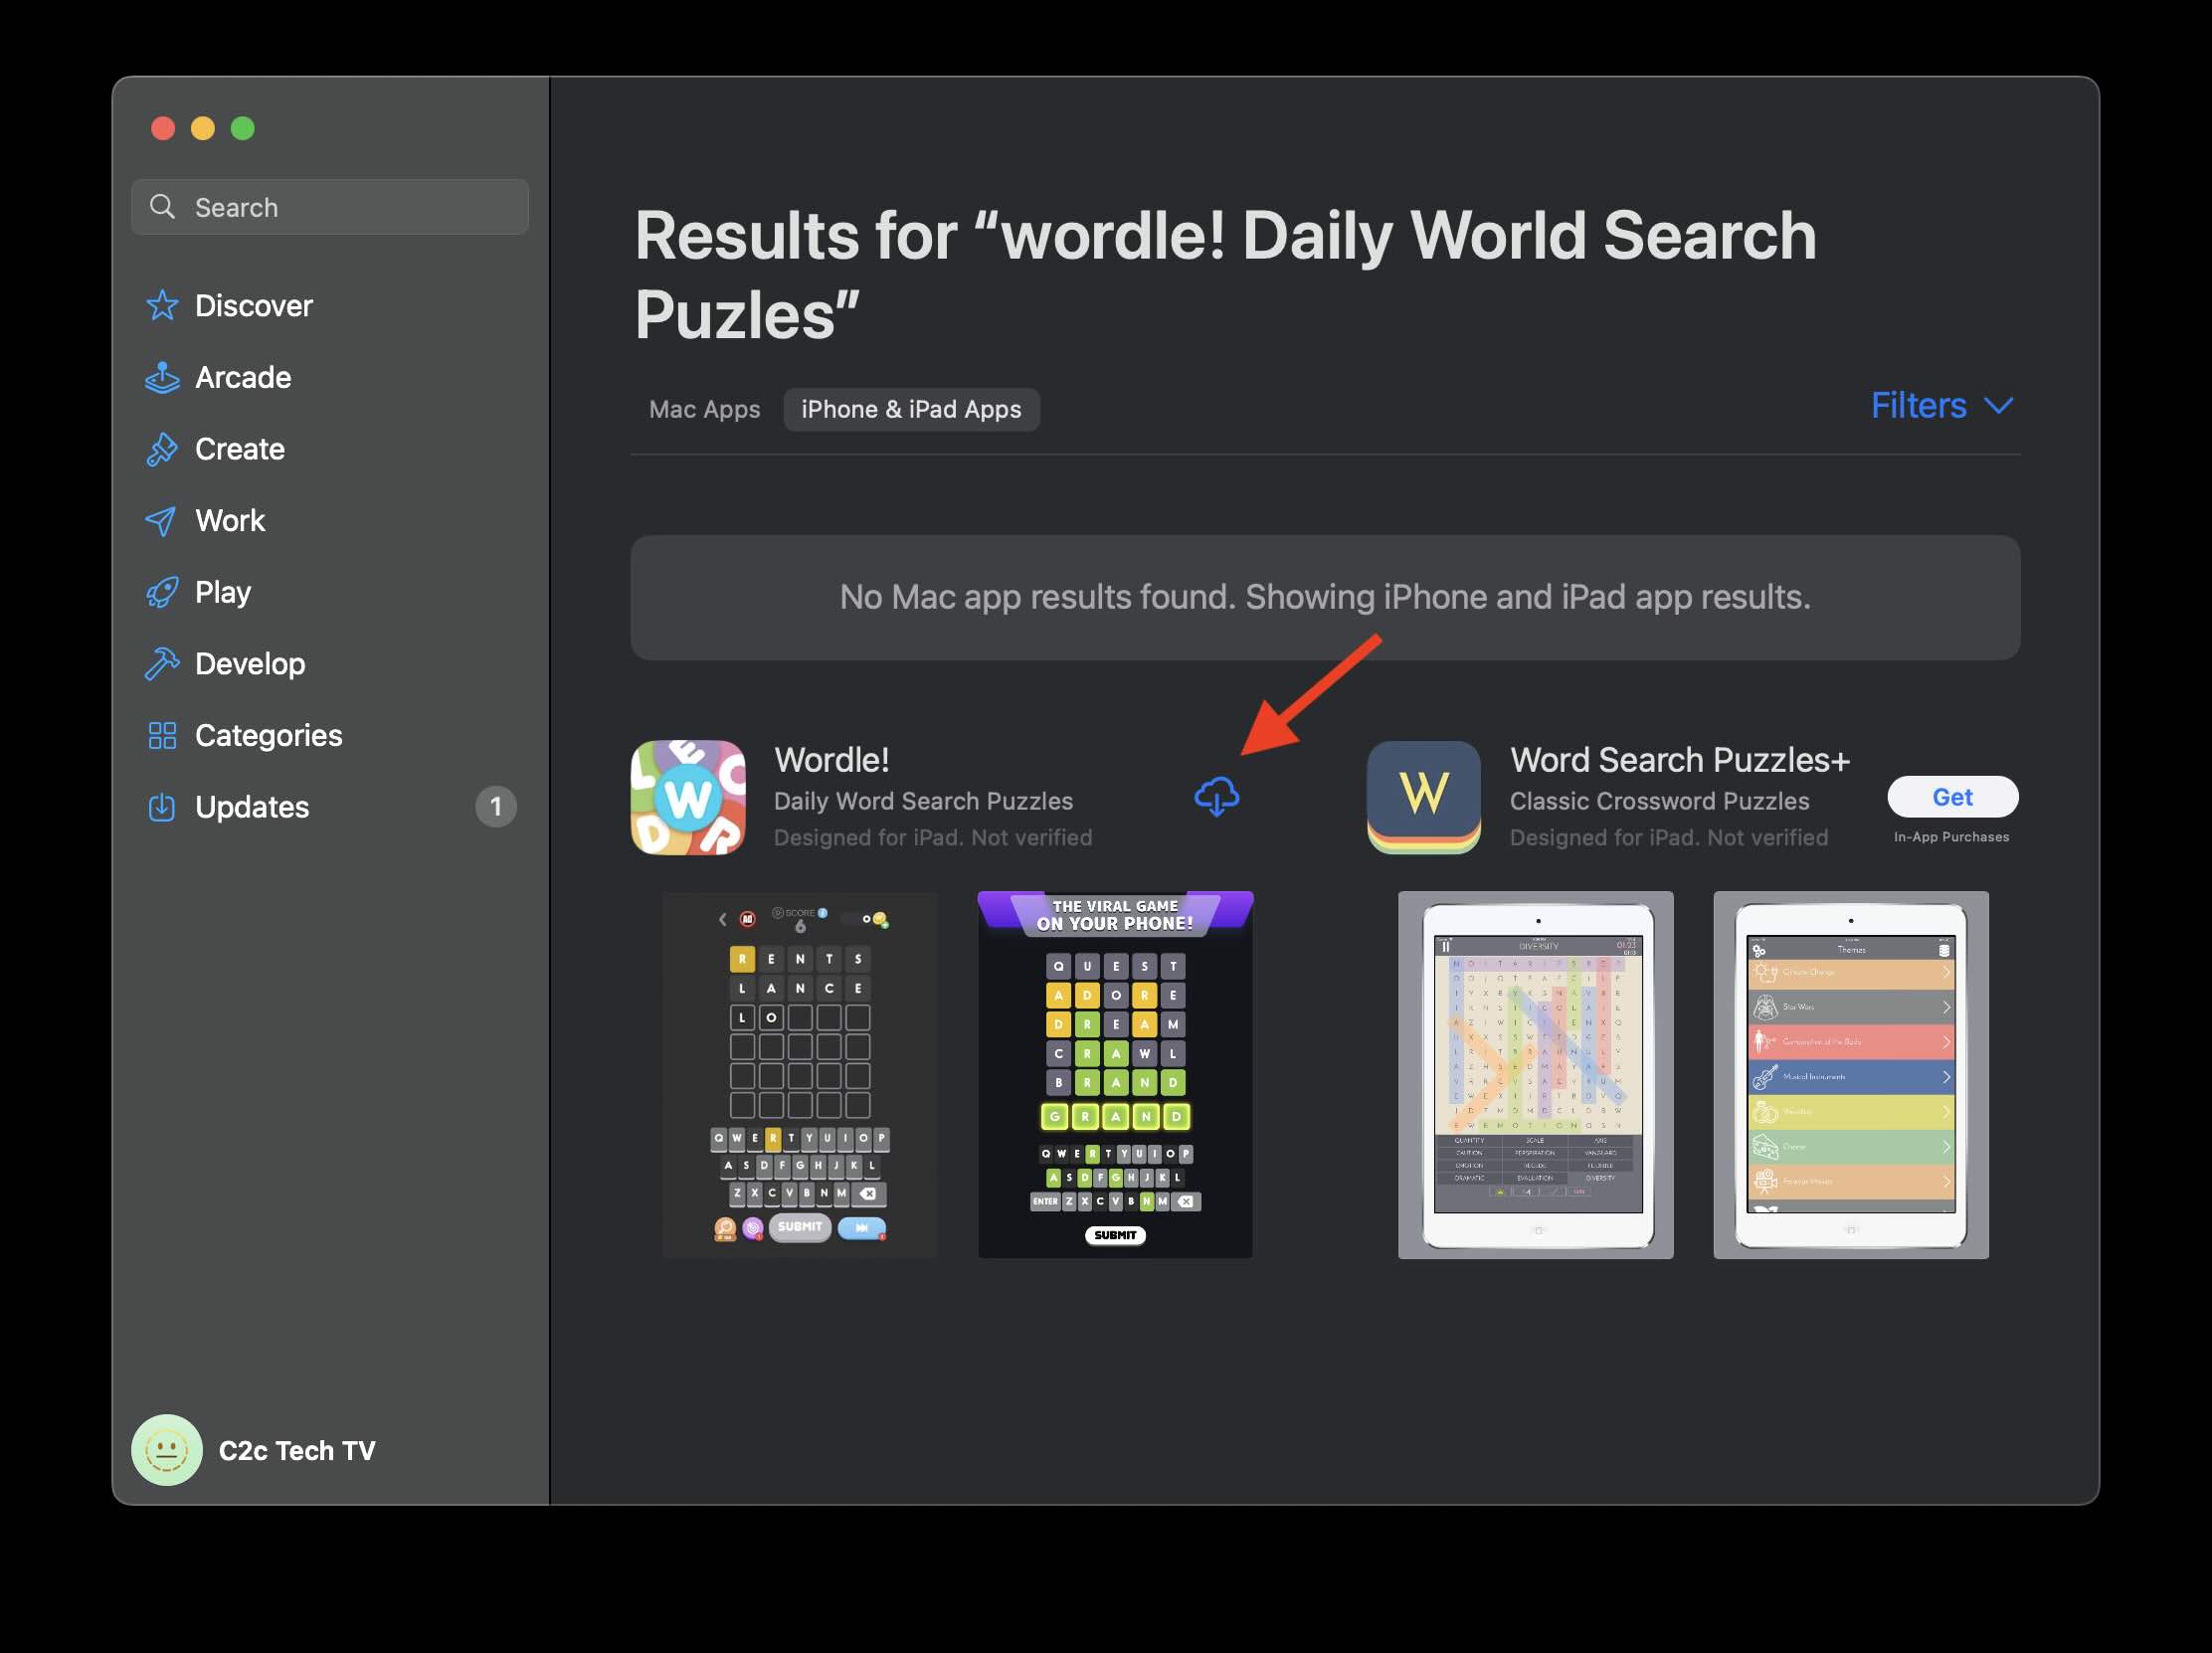 Download Wordle! on Mac from App Store